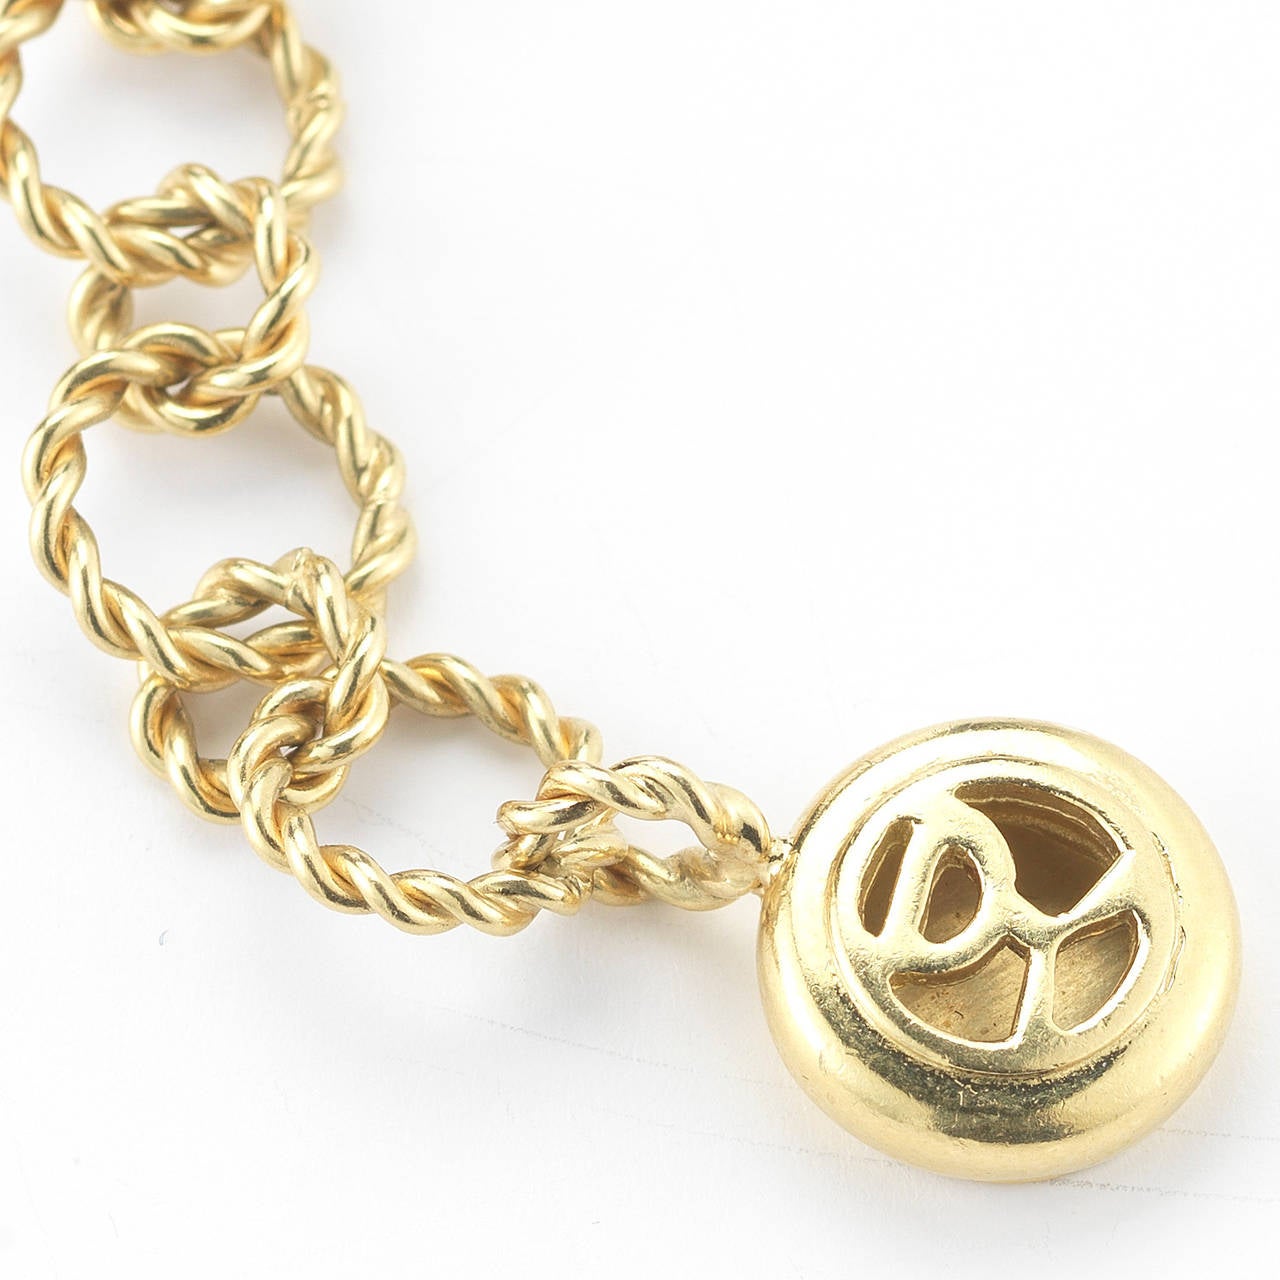 This unique David Yurman 18K yellow gold necklace features Yurman's classic cable twist workmanship throughout in a checkerboard mosaic outline creating a dramatic show stopping choker accented with pave diamonds surrounded by white gold.